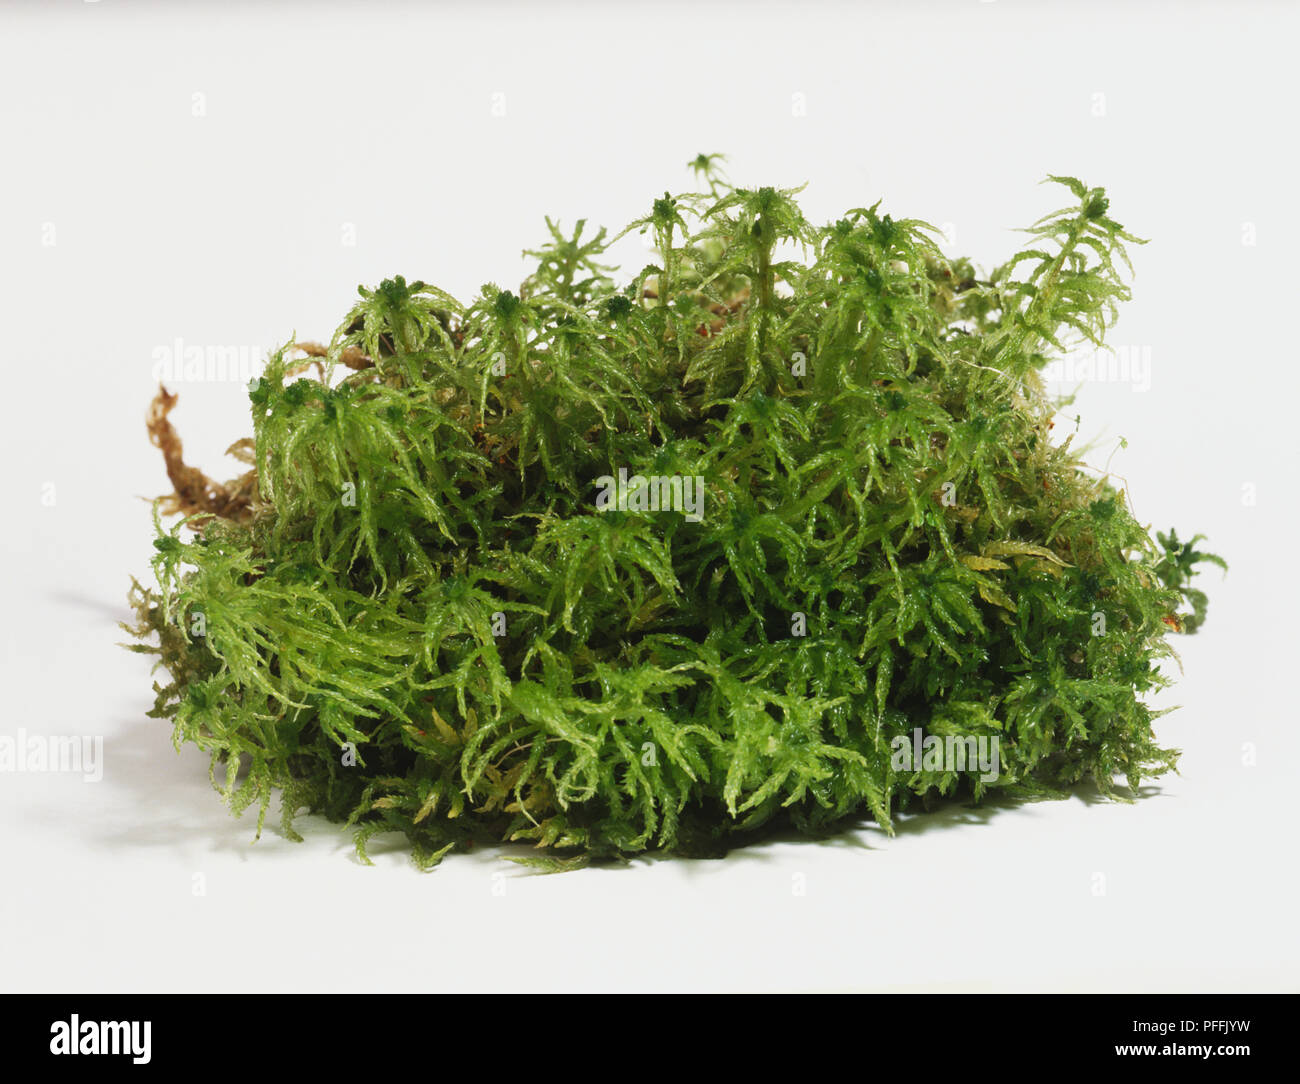 Sphagnum, clump of green moss. Stock Photo